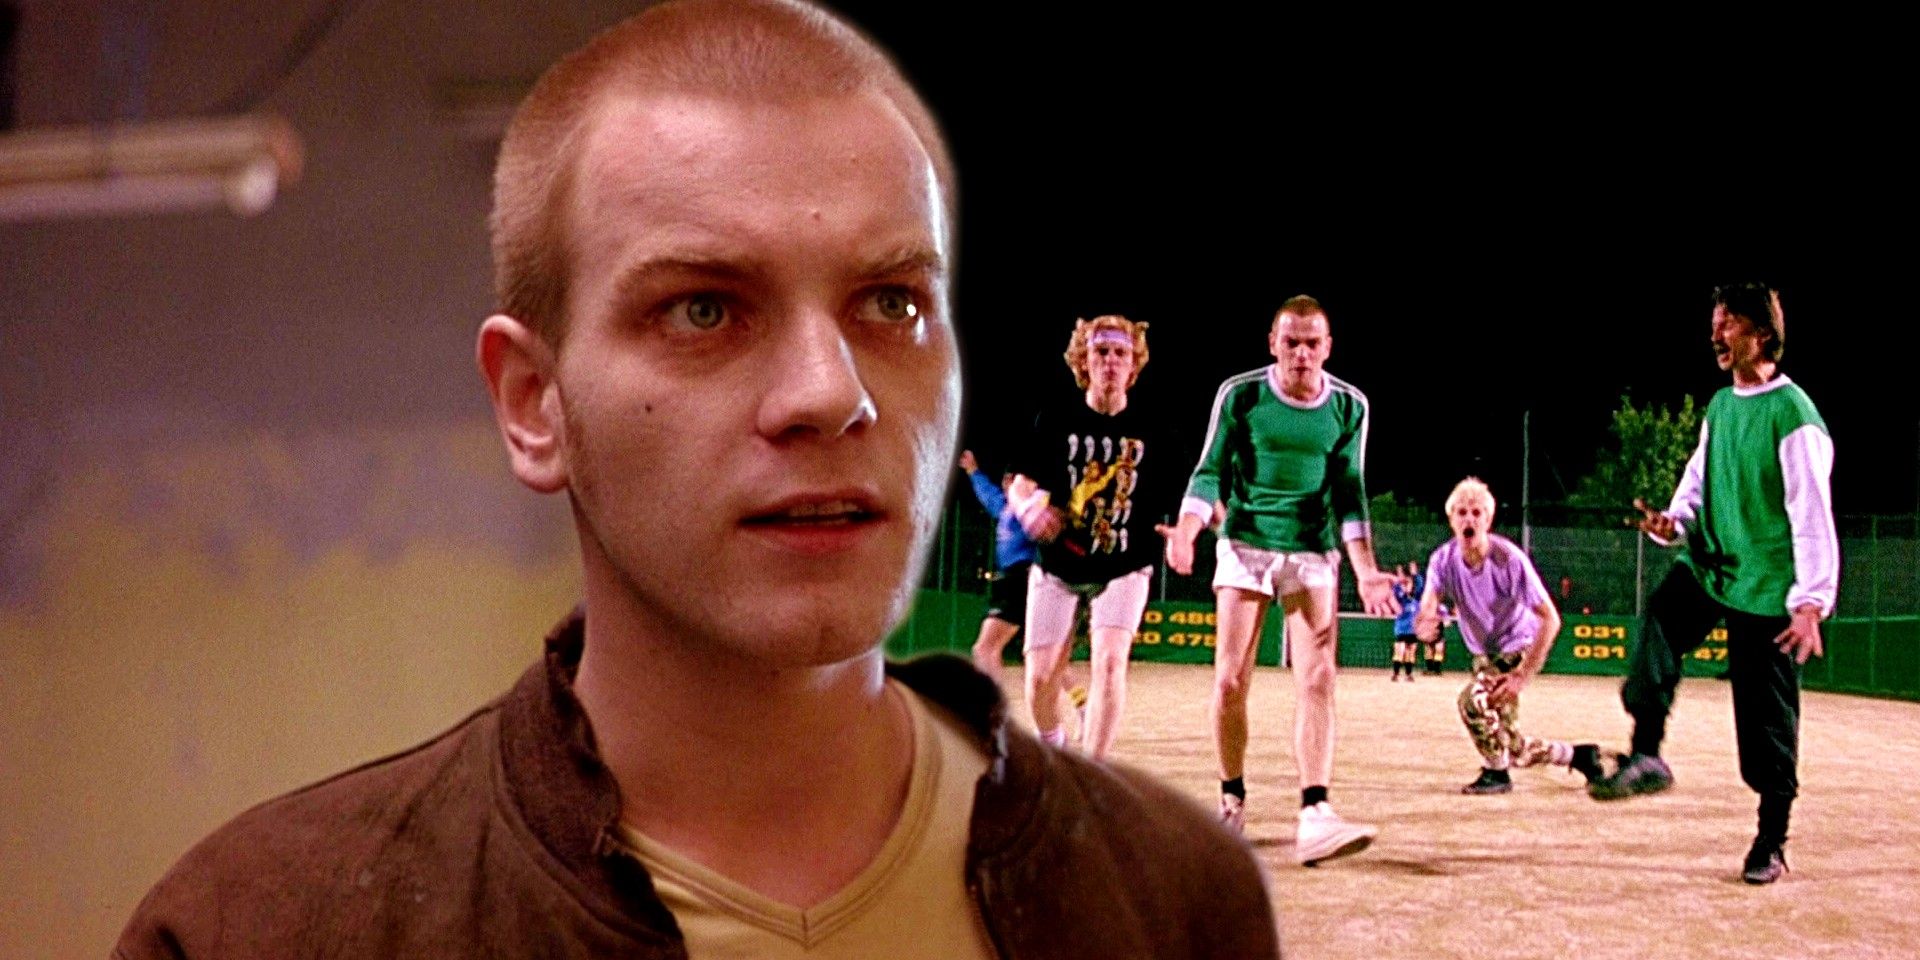 Custom image of Ewan McGregor and his friends playing soccer in Trainspotting